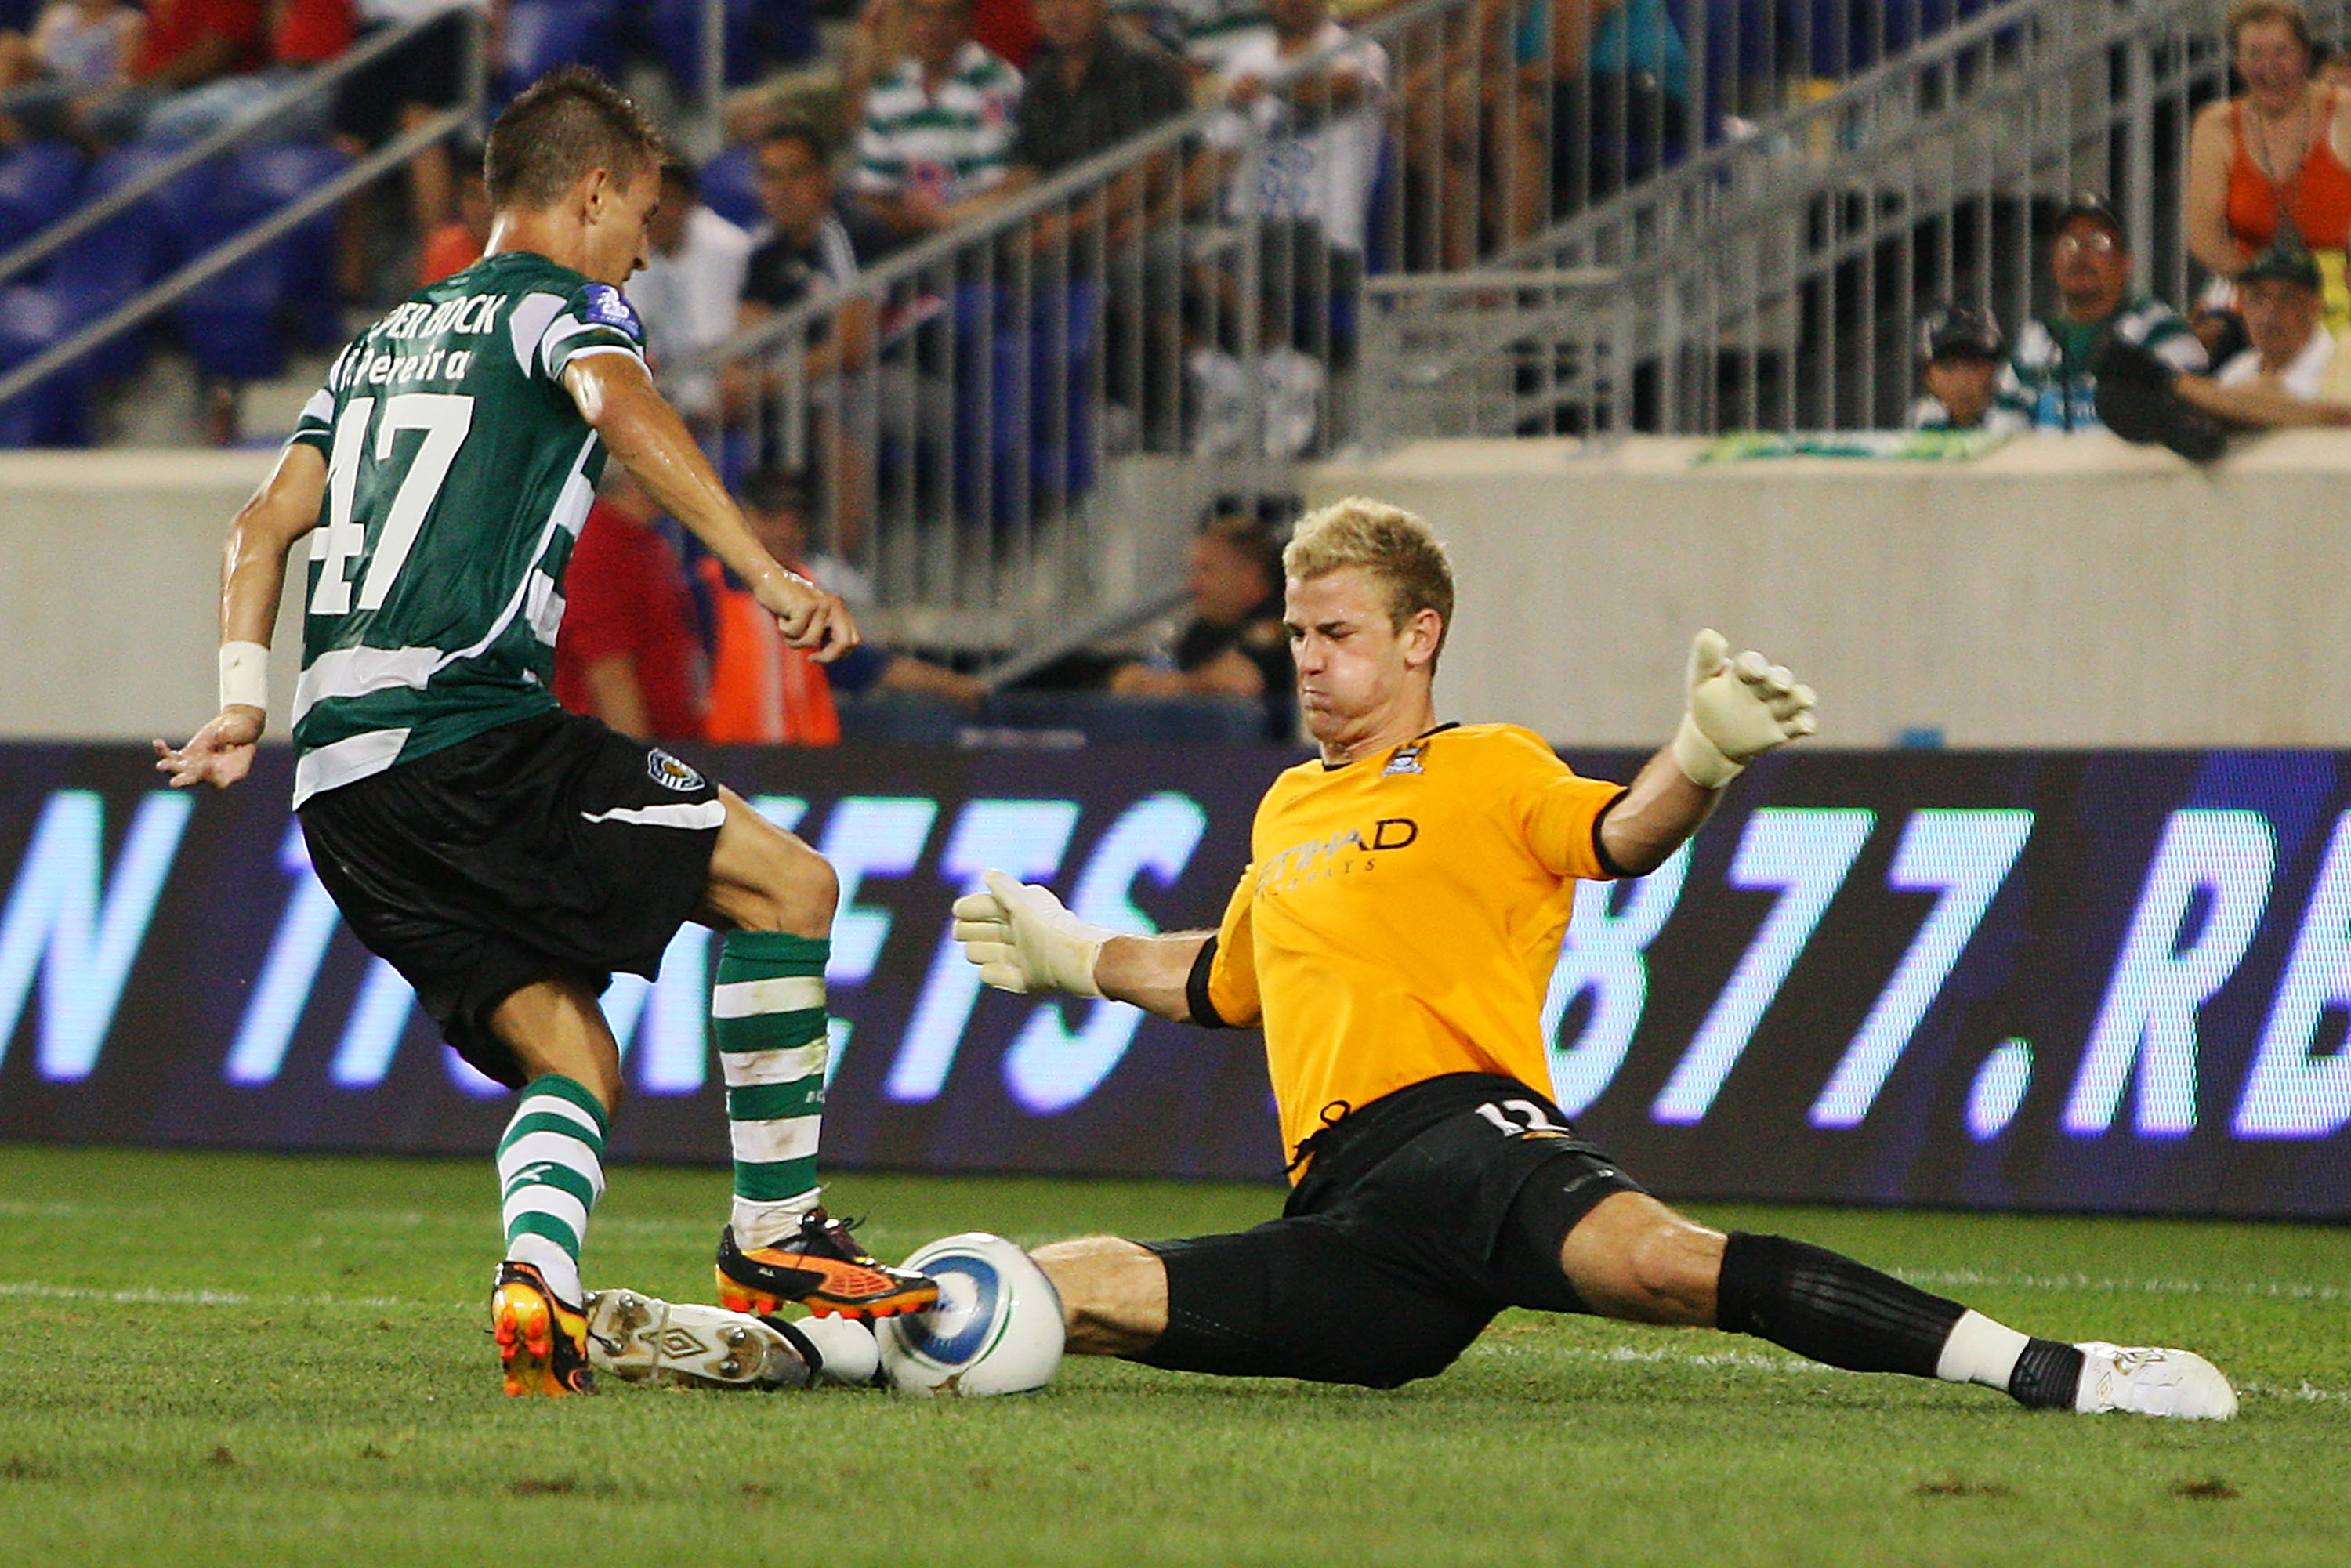 HARRISON, NJ - JULY 23:  Goalkeeper Joe Hart #12 of Manchester City makes a save against Joao Pereira #47 of Sporting Lisbon in the Barclays New York Challenge July 23, 2010 at Red Bull Arena in Harrison, New Jersey. Sporting Lisbon won 2-0.  (Photo by Mi